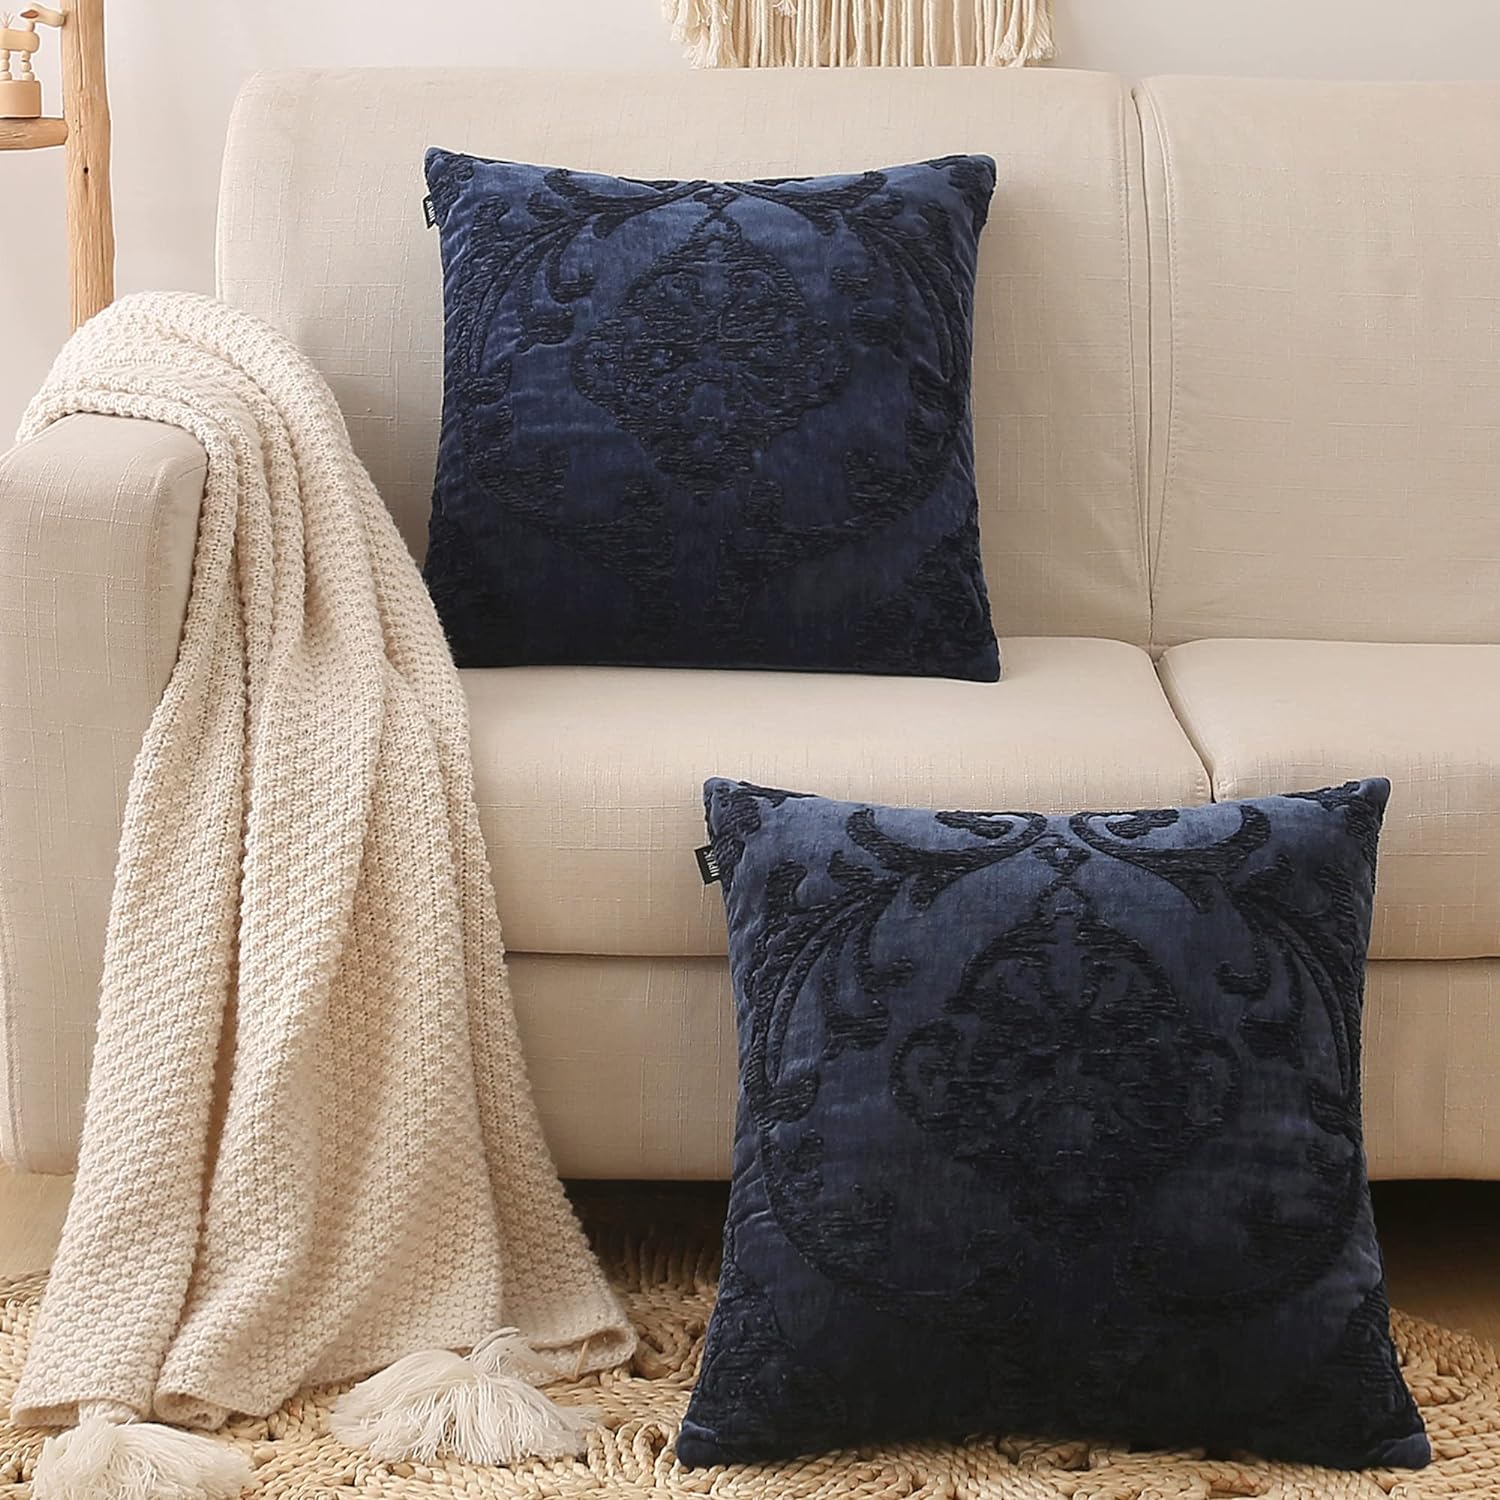 HPUK Throw Pillow Covers with Damask Embroidered Pattern, 18x18 inch, Pack of 2 European Retro Navy Blue Square Decorative Accent Cushion Covers for Living Room, Sofa